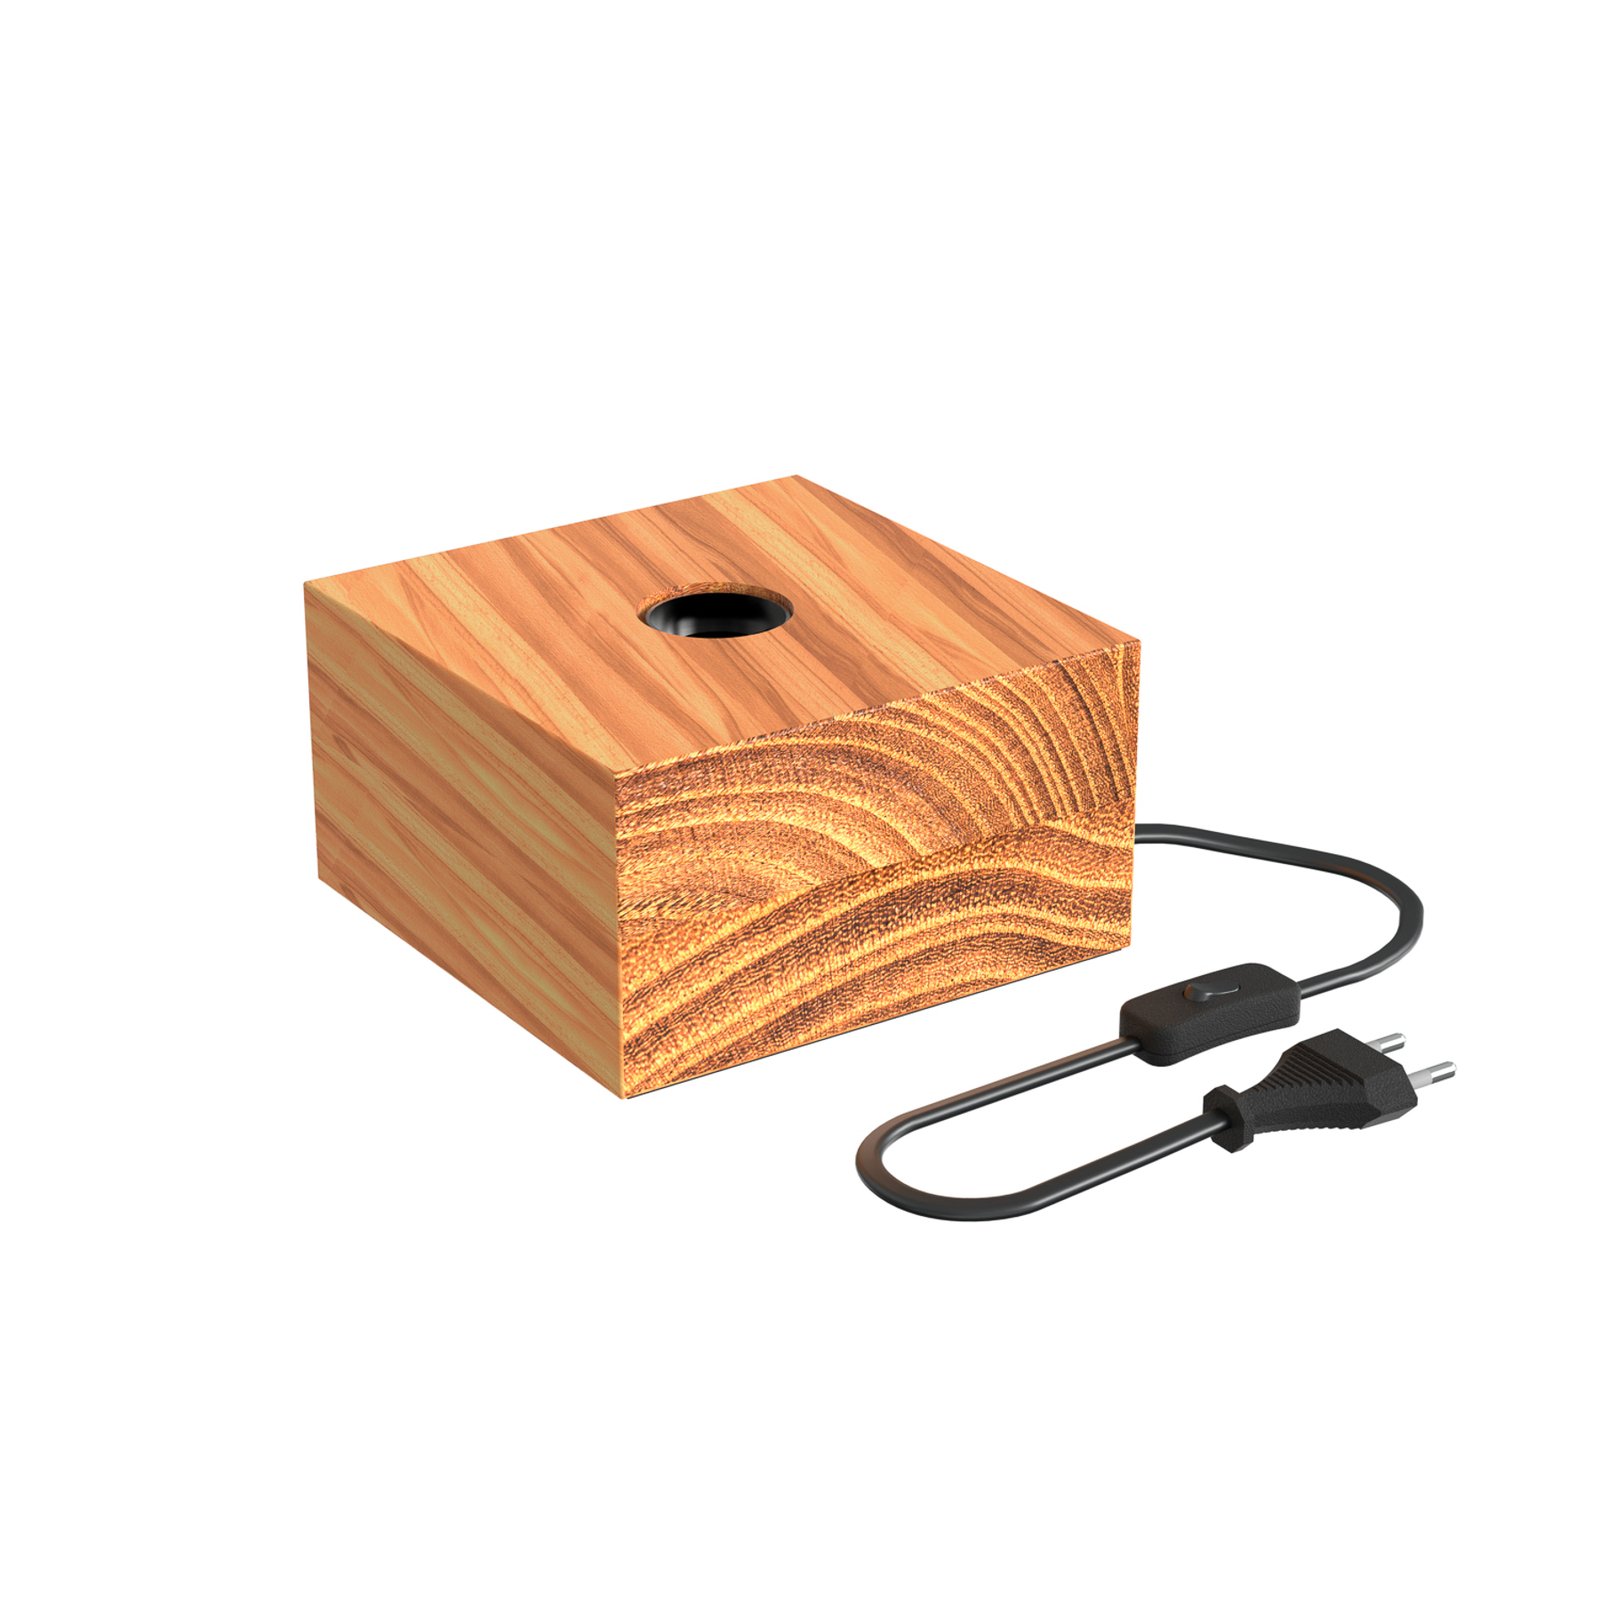 Calex Square Wood table lamp made of wood